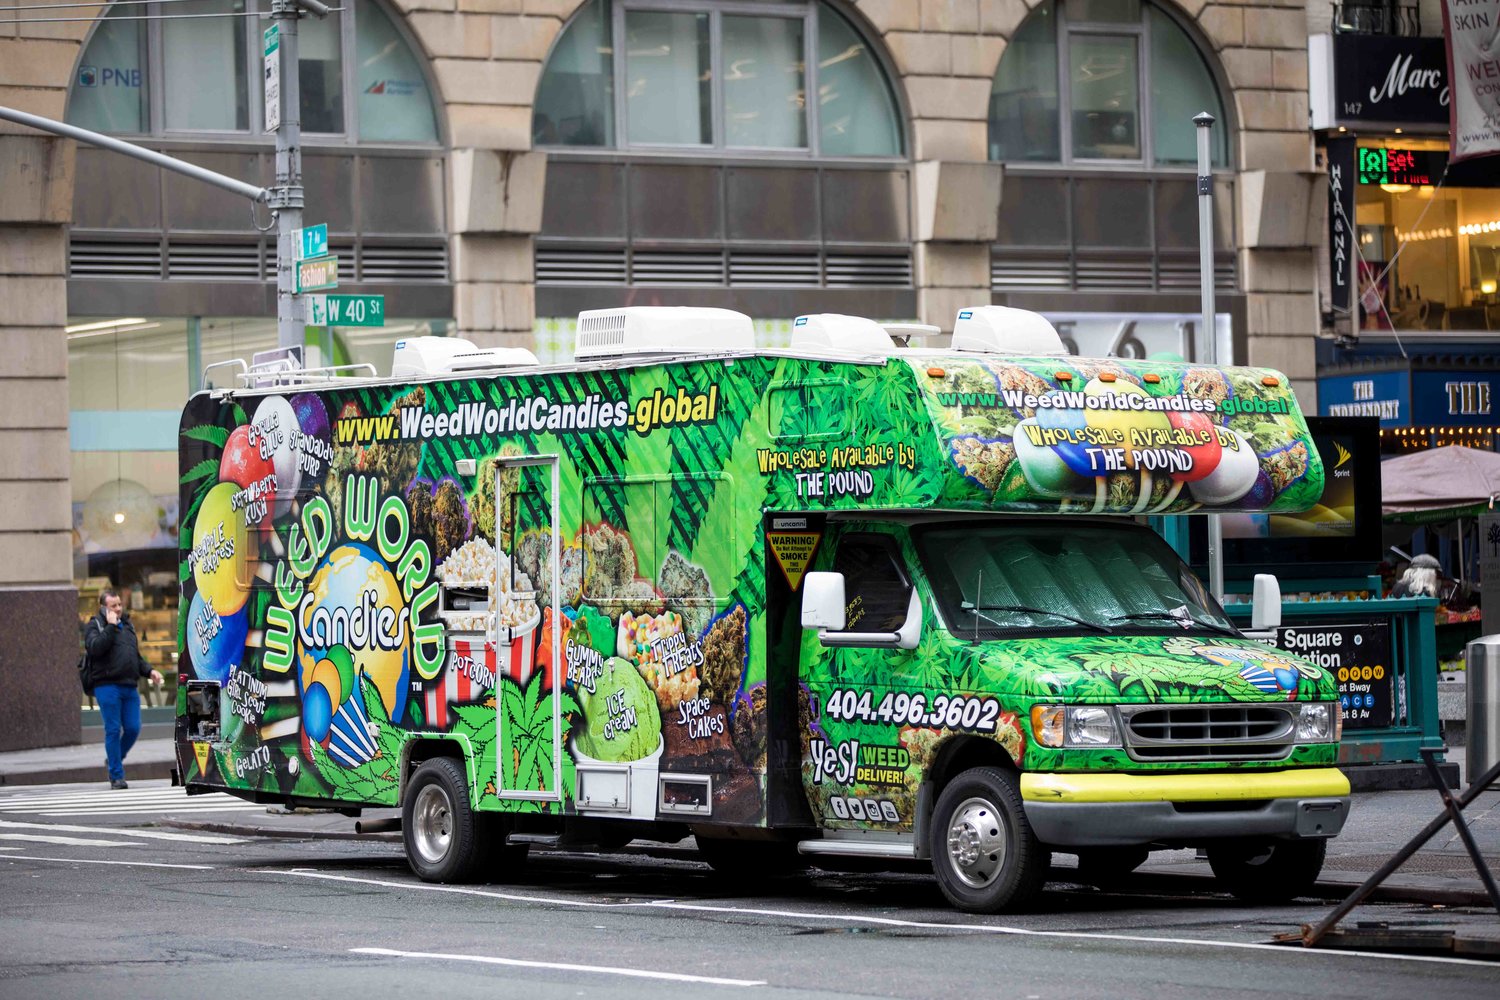 The trucks for Weed World Candies are a familiar sight in the city. While the organization doesn’t sell marijuana, it does advocate for the legalization of the plant, which could soon happen in the state.